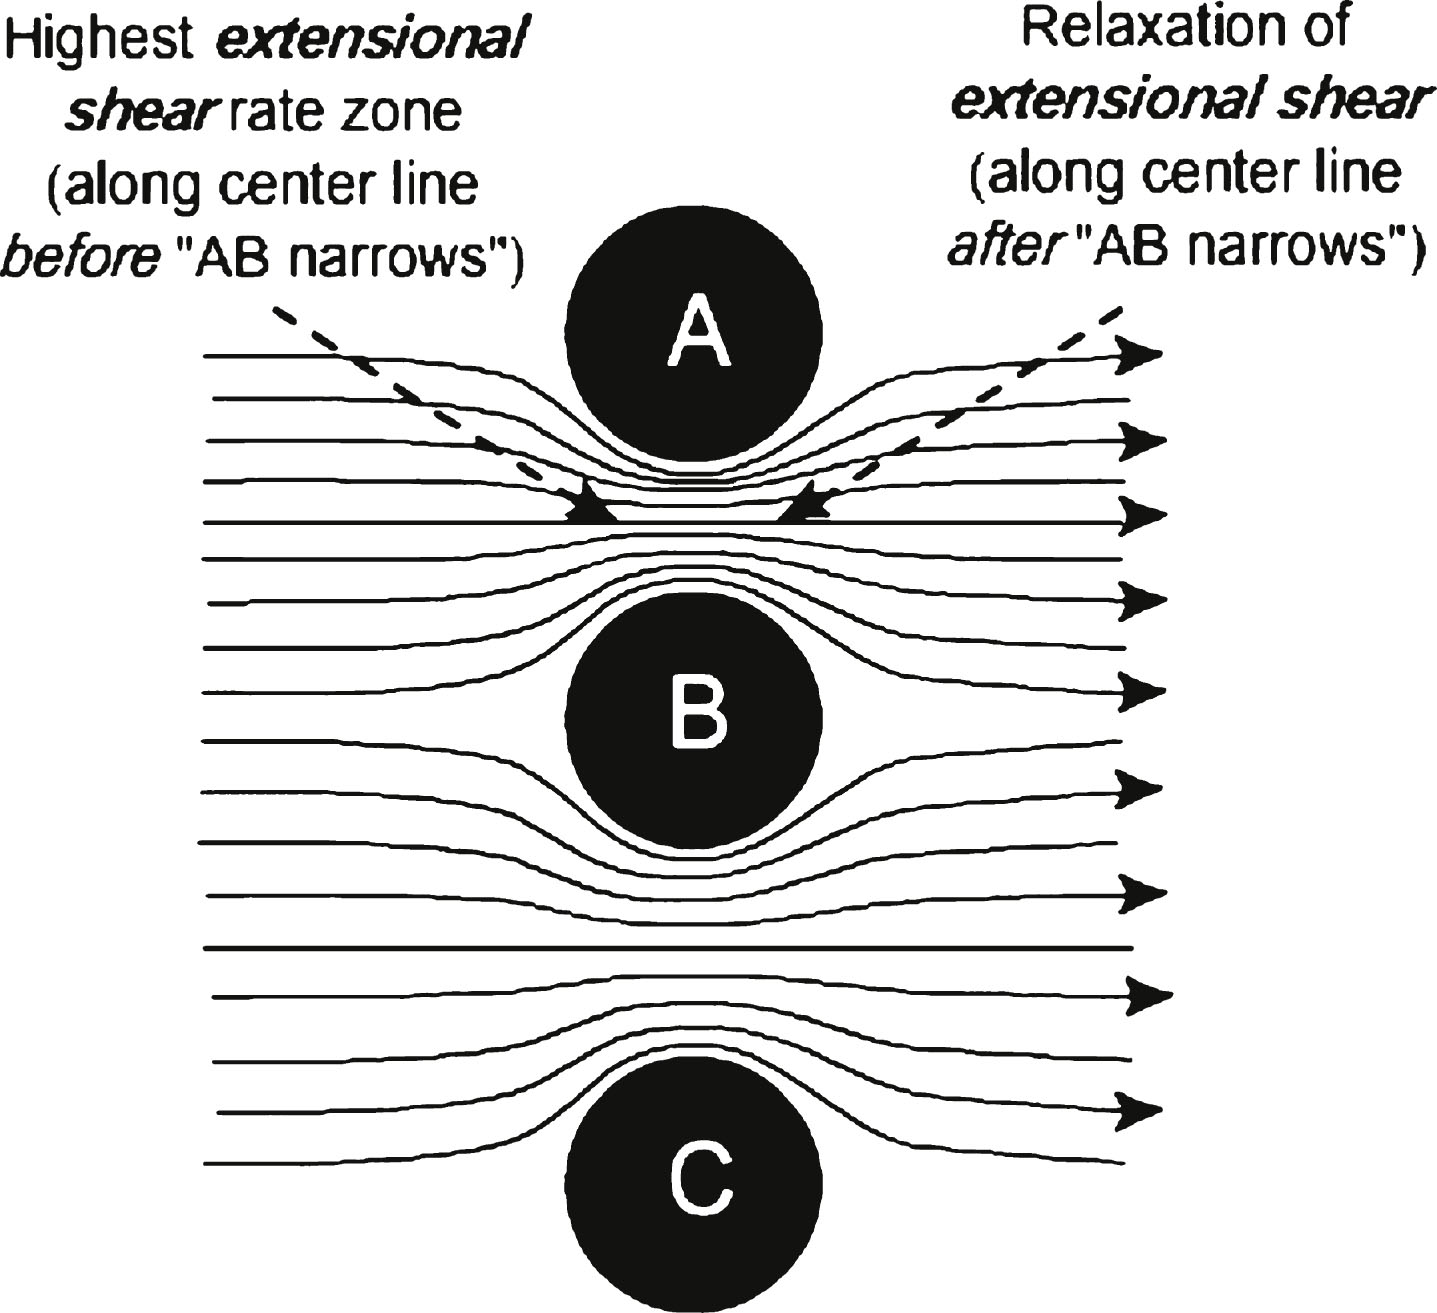 Illustration of extensional shear, where a long molecule entering the restricted flow zone between flow obstructions A and B along the center line senses a faster flow at the center line between the objects than at any point to the left of that on the center line, thus stretching the molecule because of the difference in the flow rates. As the molecule exits the restricted flow zone the stretching force is relaxed.